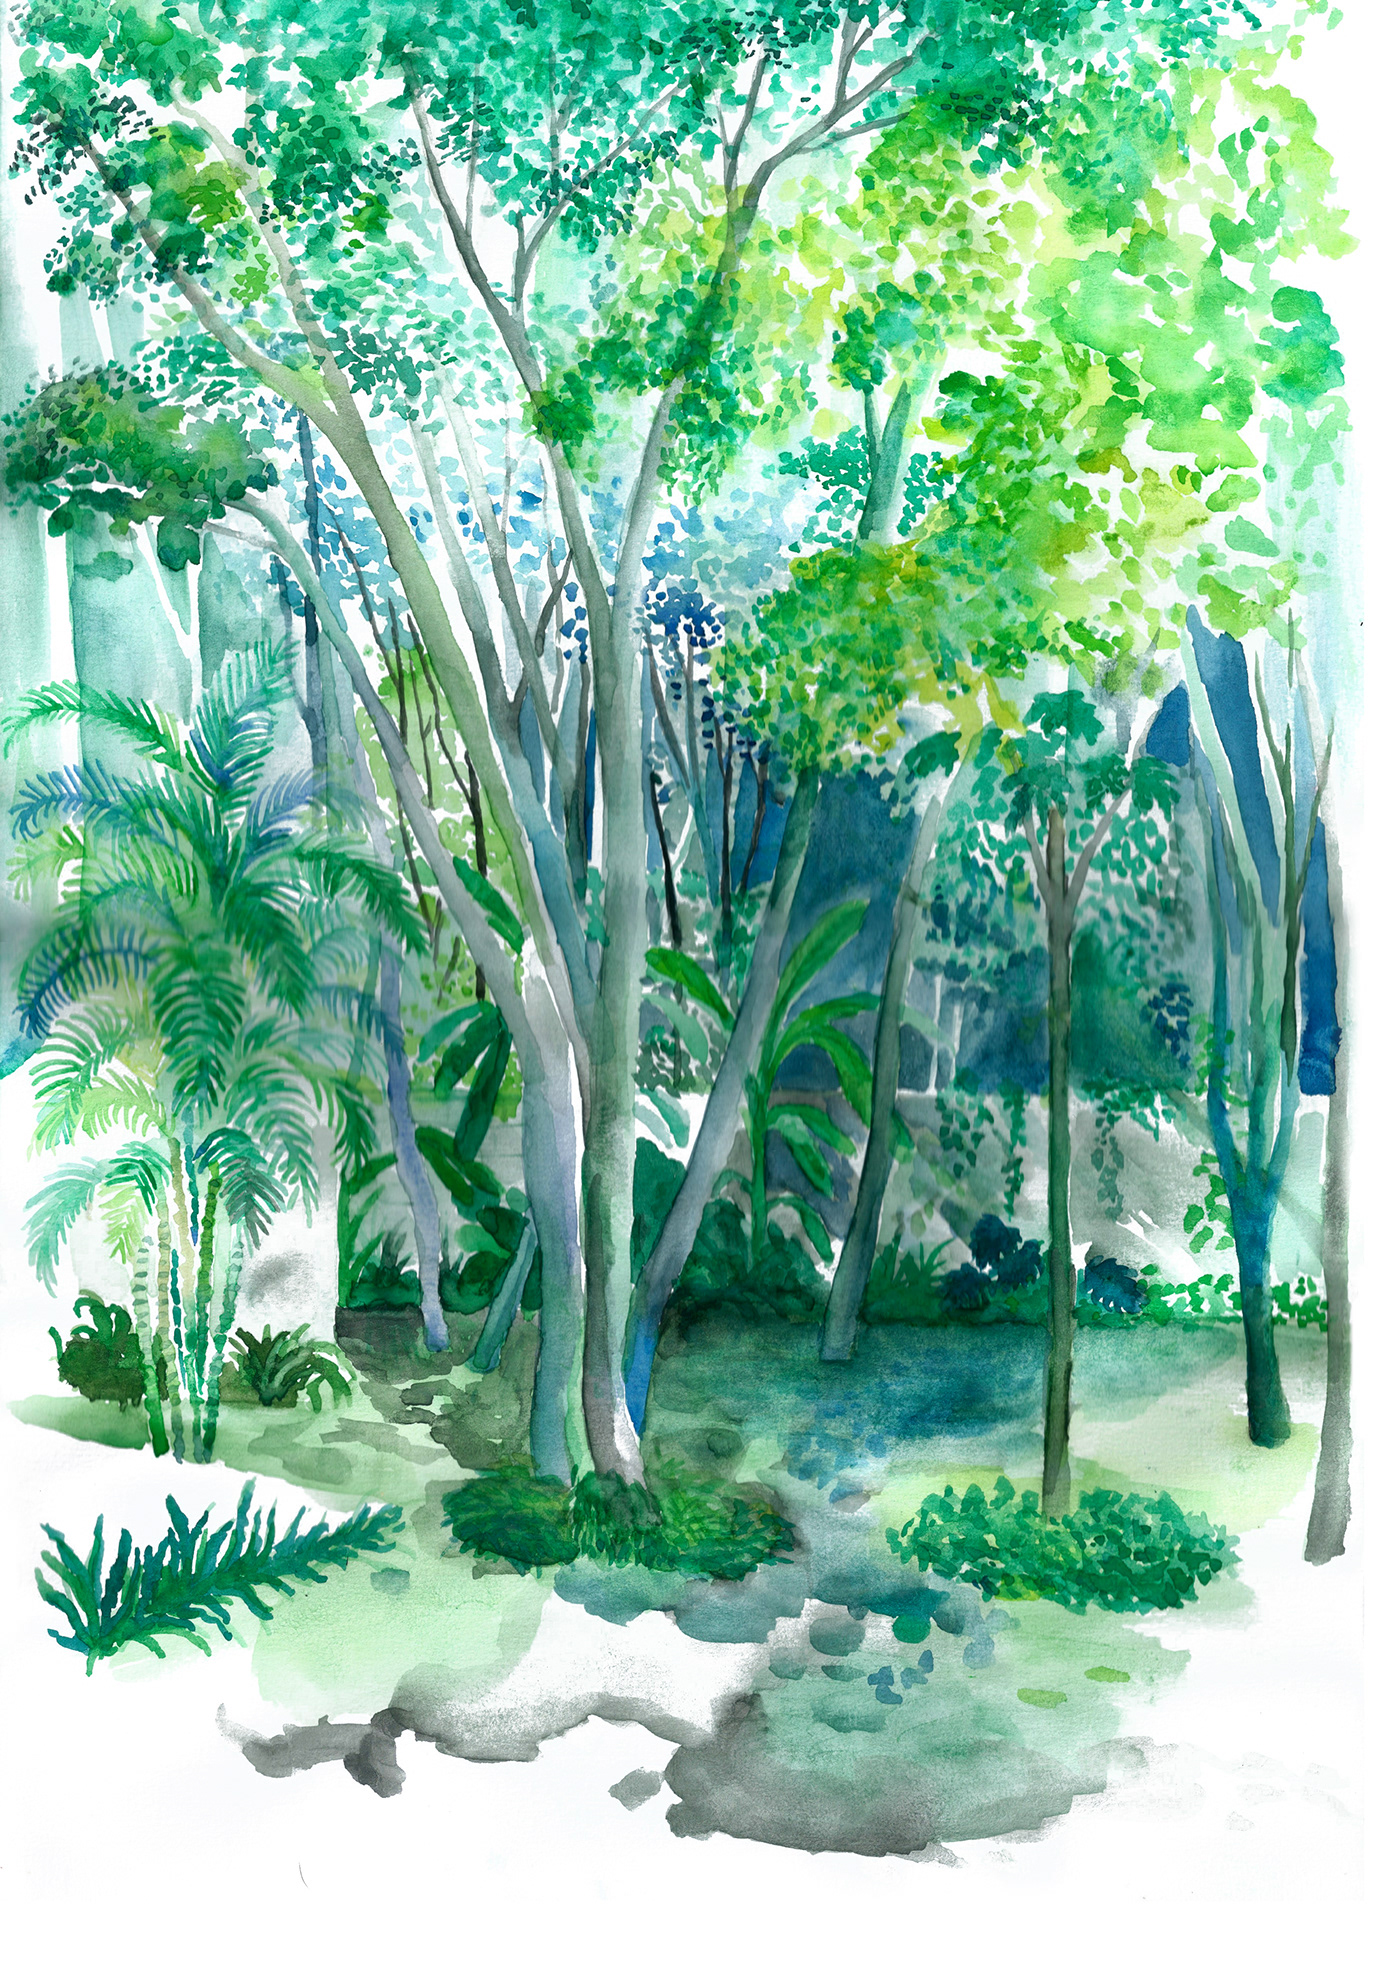 africa Landscape observation sketch train trees jungle plants mountains night